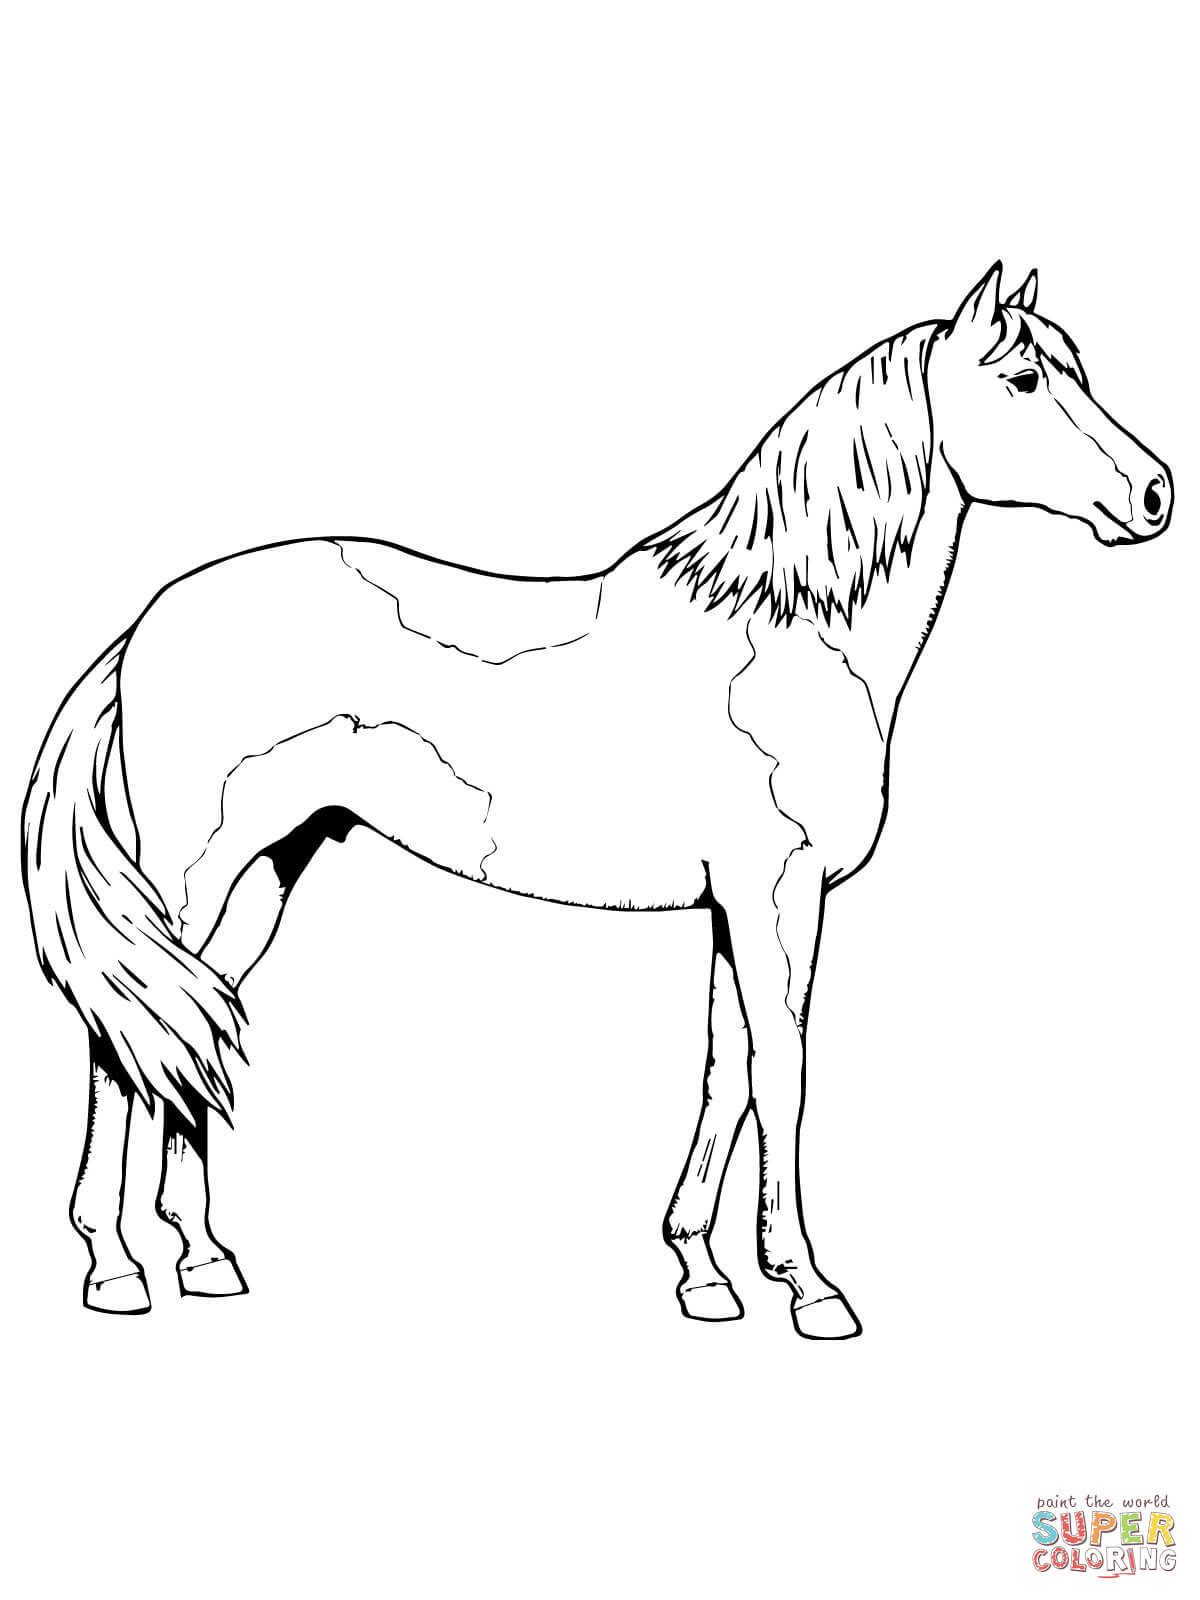 Paso Fino Horse coloring page | Free Printable Coloring Pages